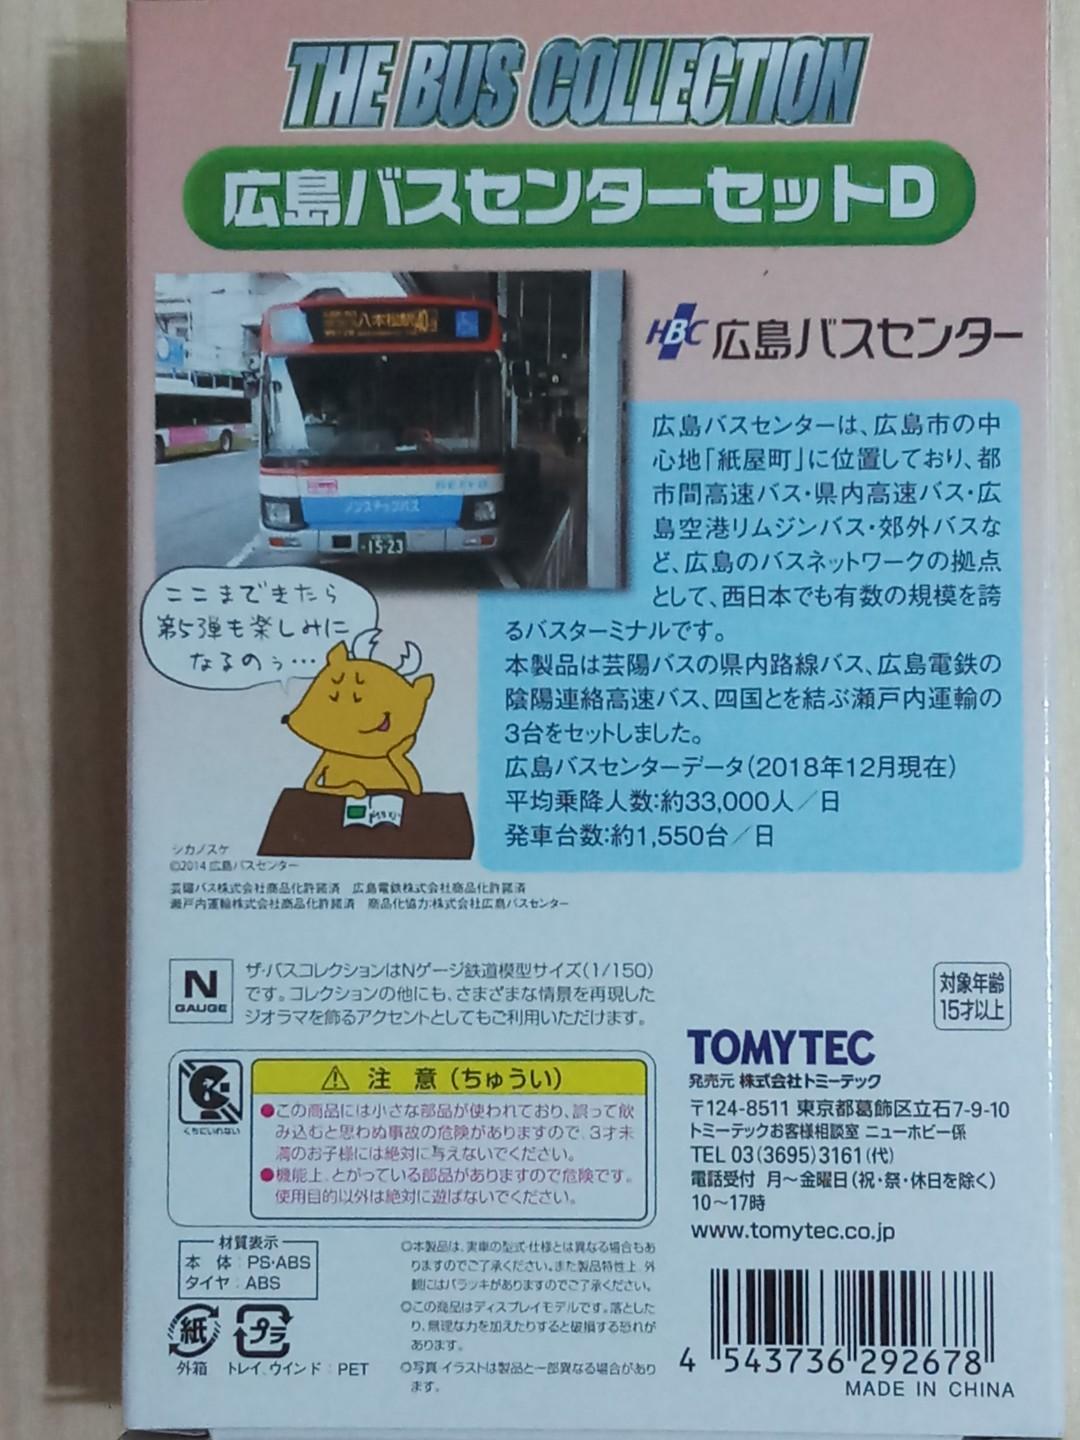 1/150 N scale TOMYTEC THE BUS COLLECTION - Hiroshima bus set D